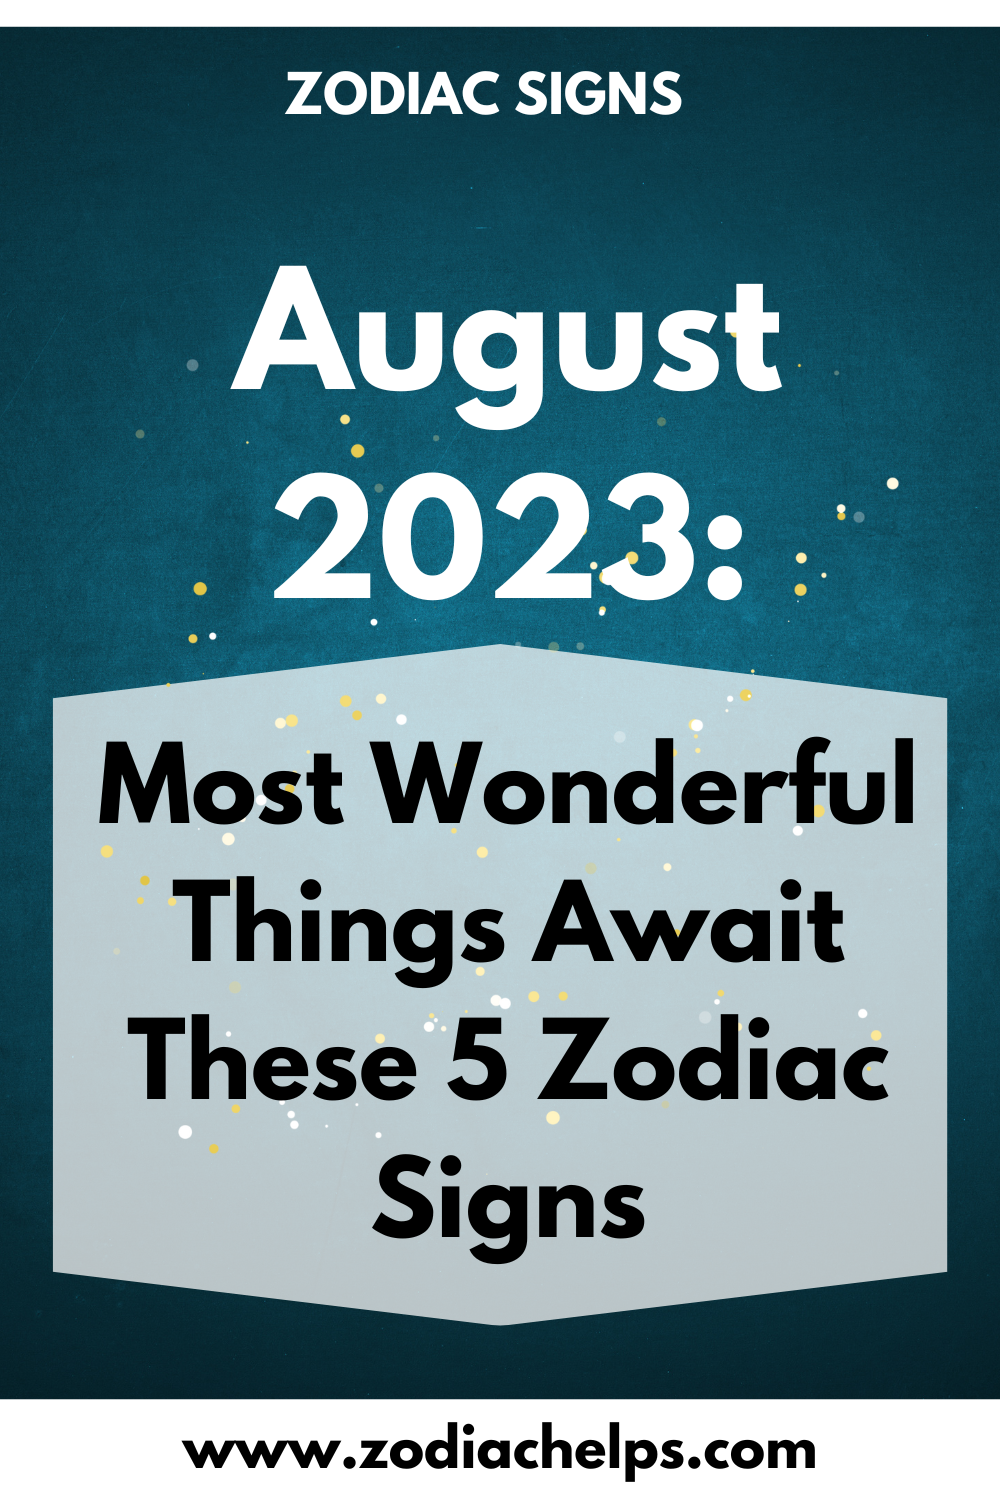 August 2023: Most Wonderful Things Await These 5 Zodiac Signs